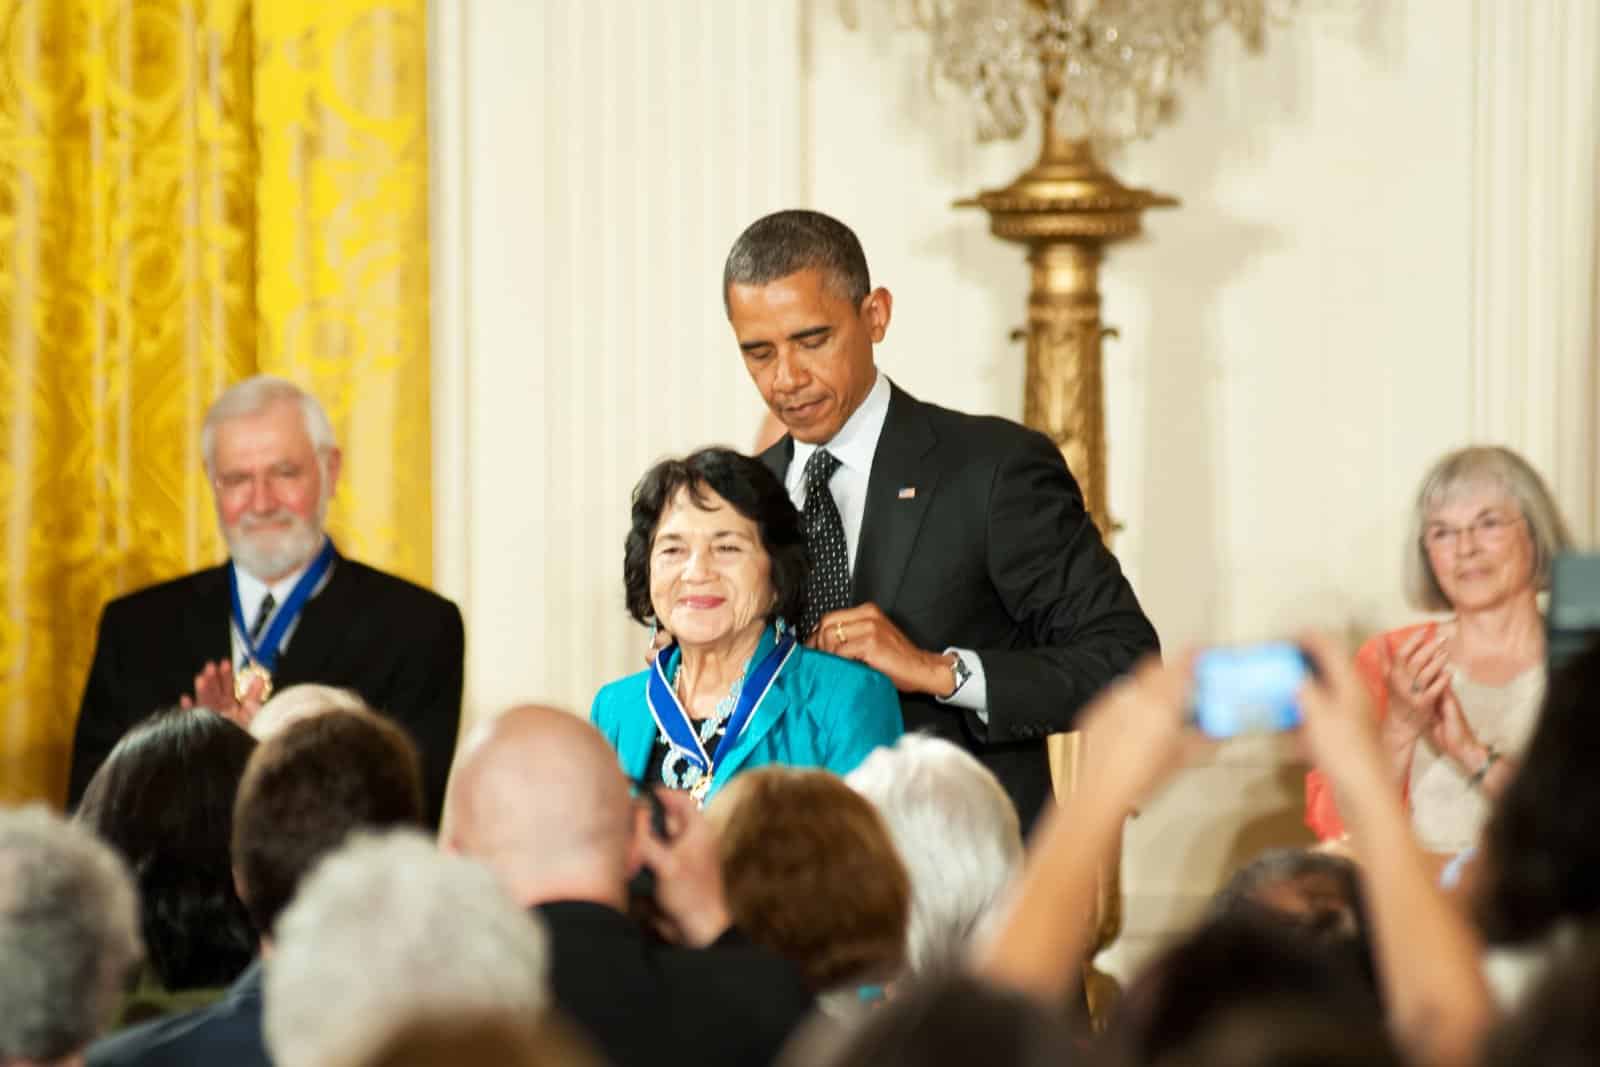 Image Credit: Shutterstock / Rena Schild <p><span>Dolores Huerta, a Chicana labor leader and civil rights activist, co-founded the National Farm Workers Association alongside Cesar Chavez, championing the rights of migrant workers and fighting against exploitative labor practices in agriculture.</span></p>